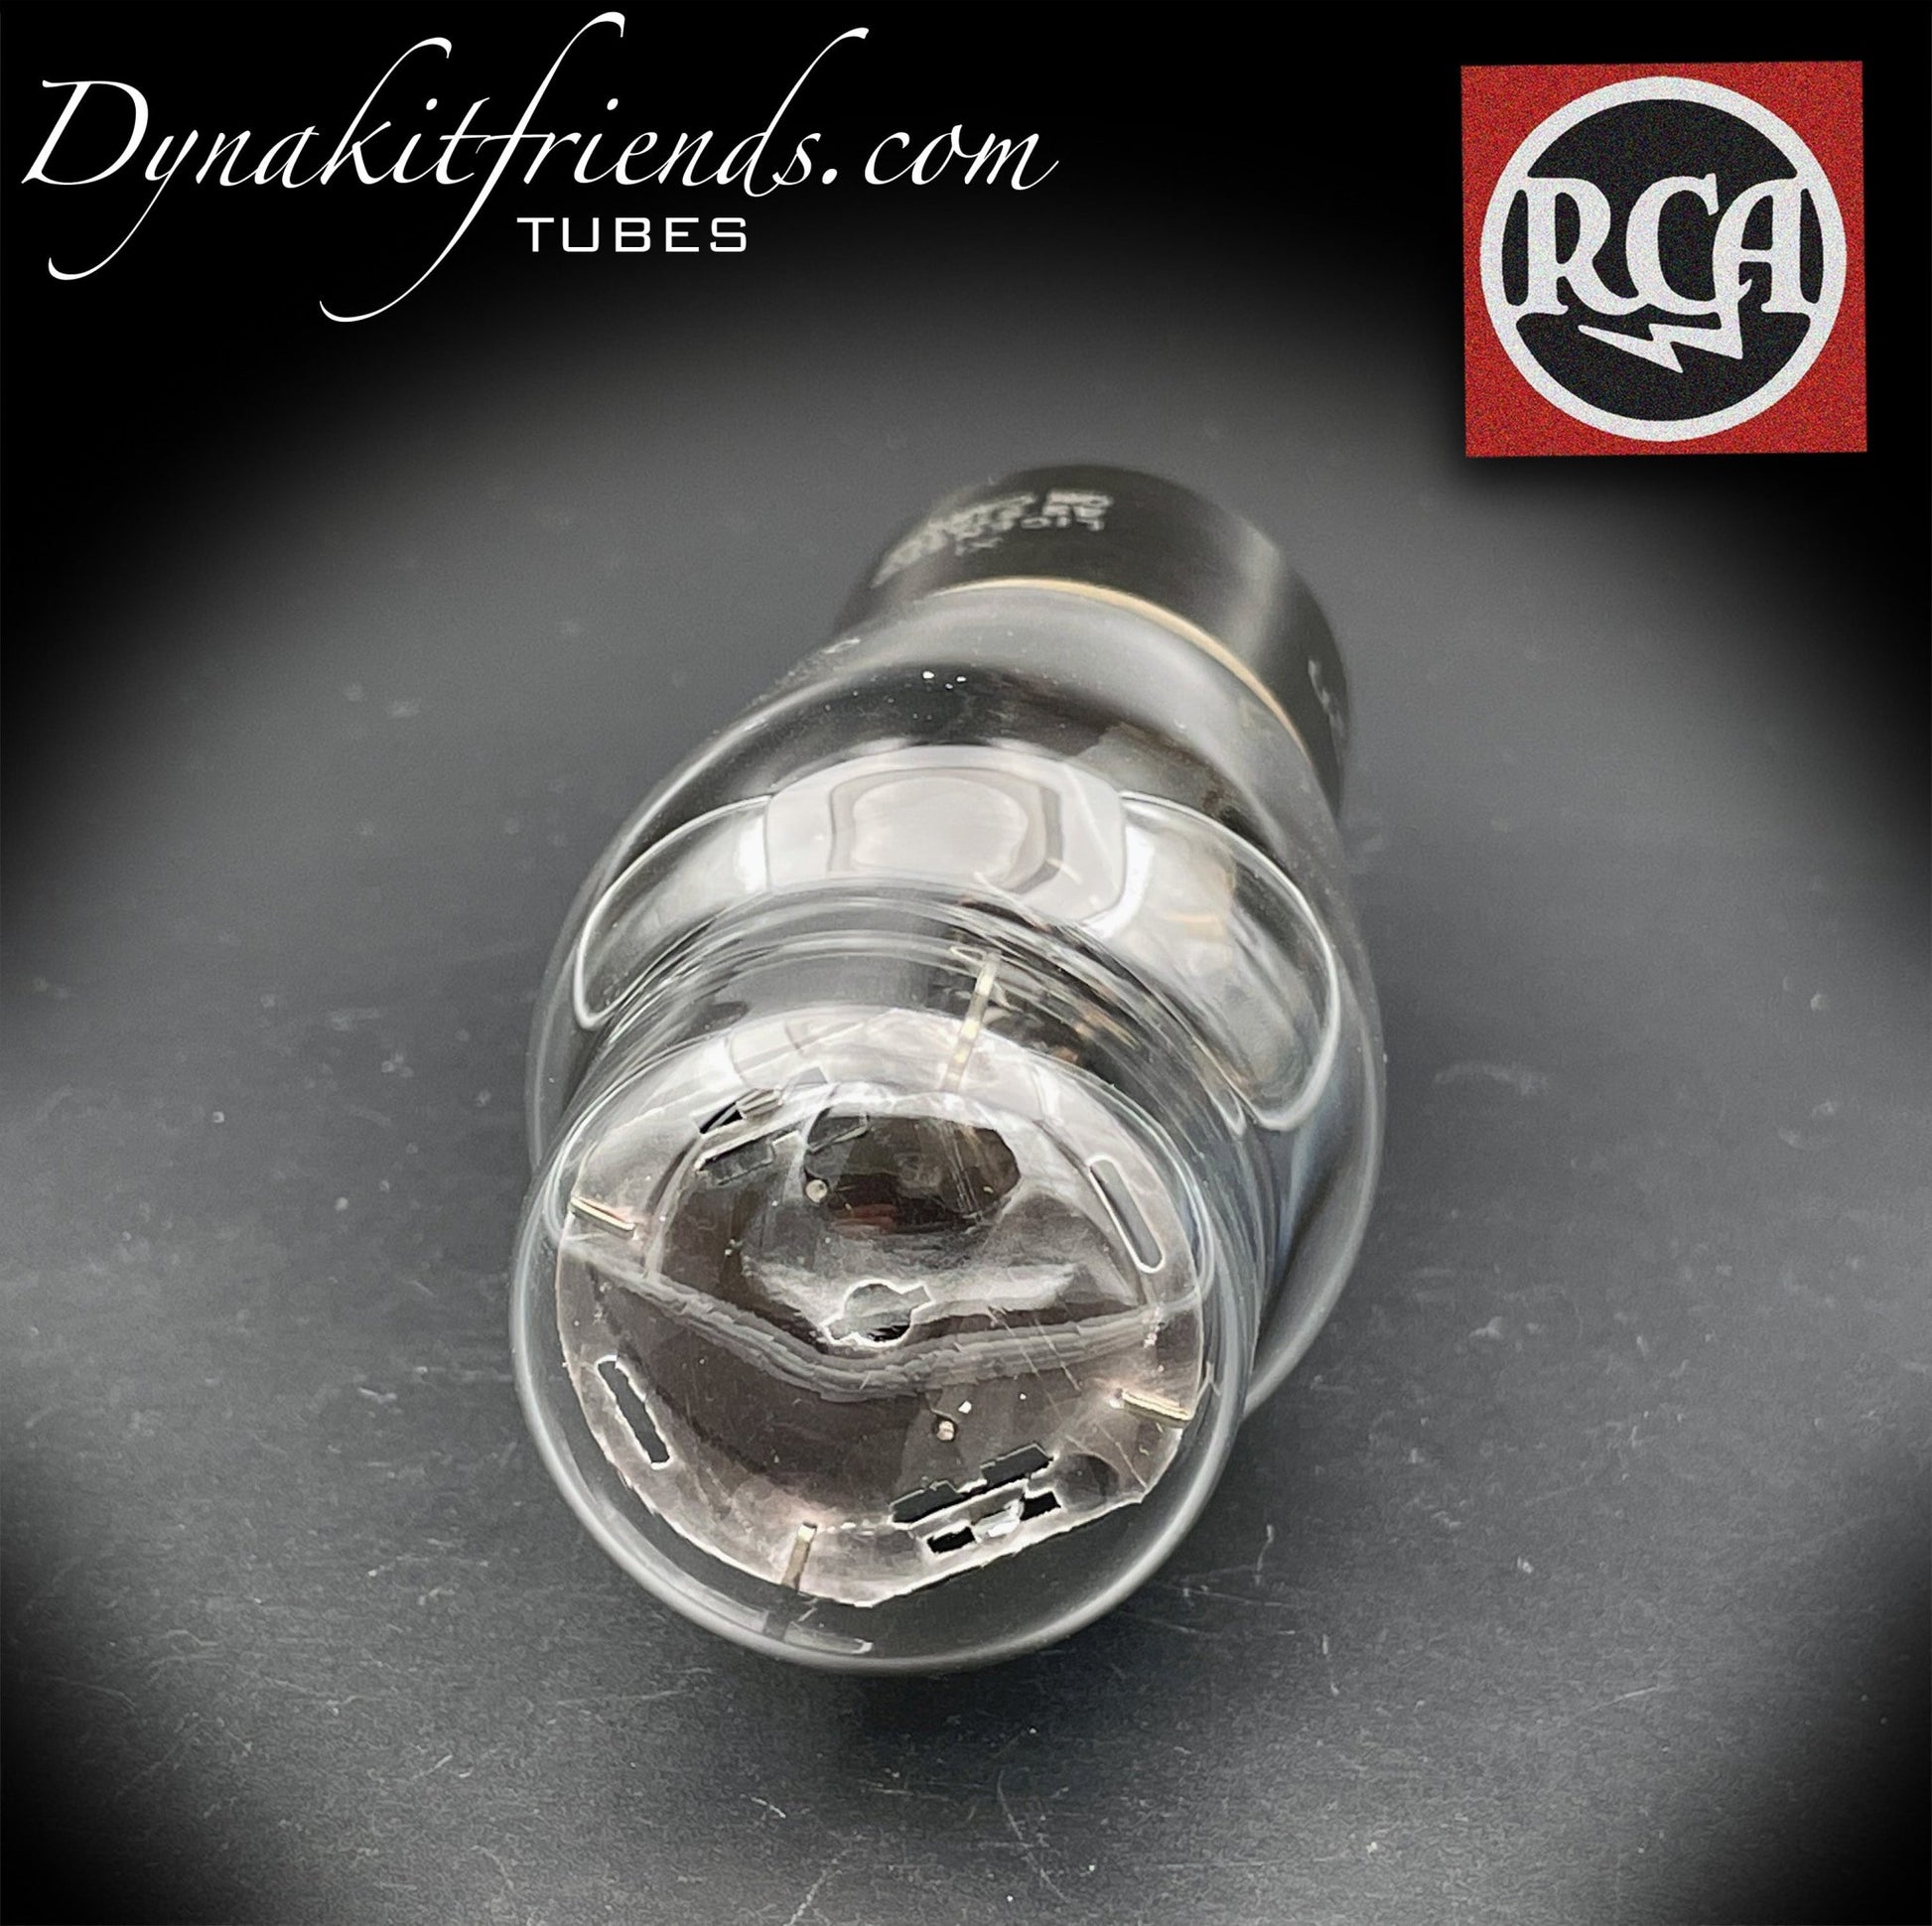 80 ( 110E/59 ) RCA Black Plates Foil Getter Rectifier Tube Made in USA - Vacuum Tubes Treasures